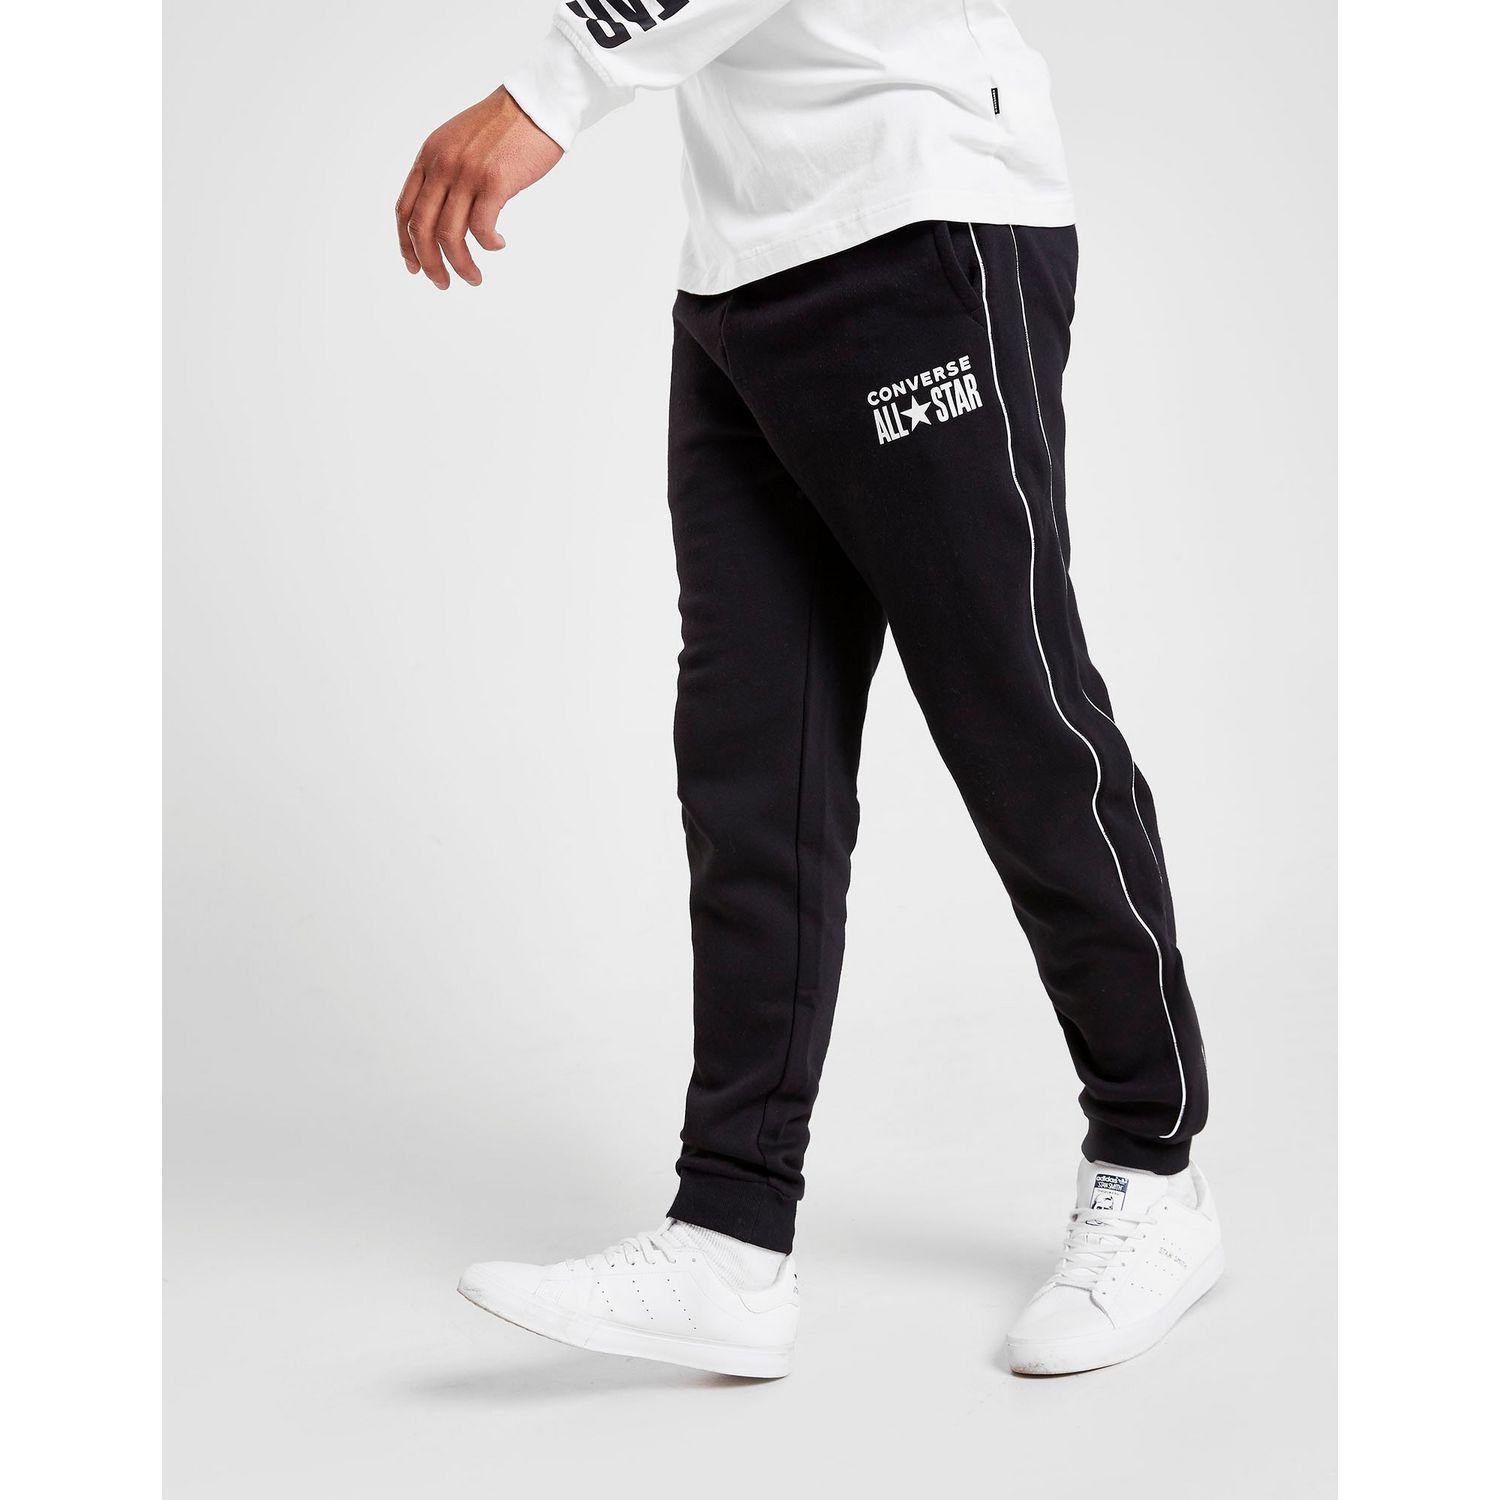 converse all star track pants Online 